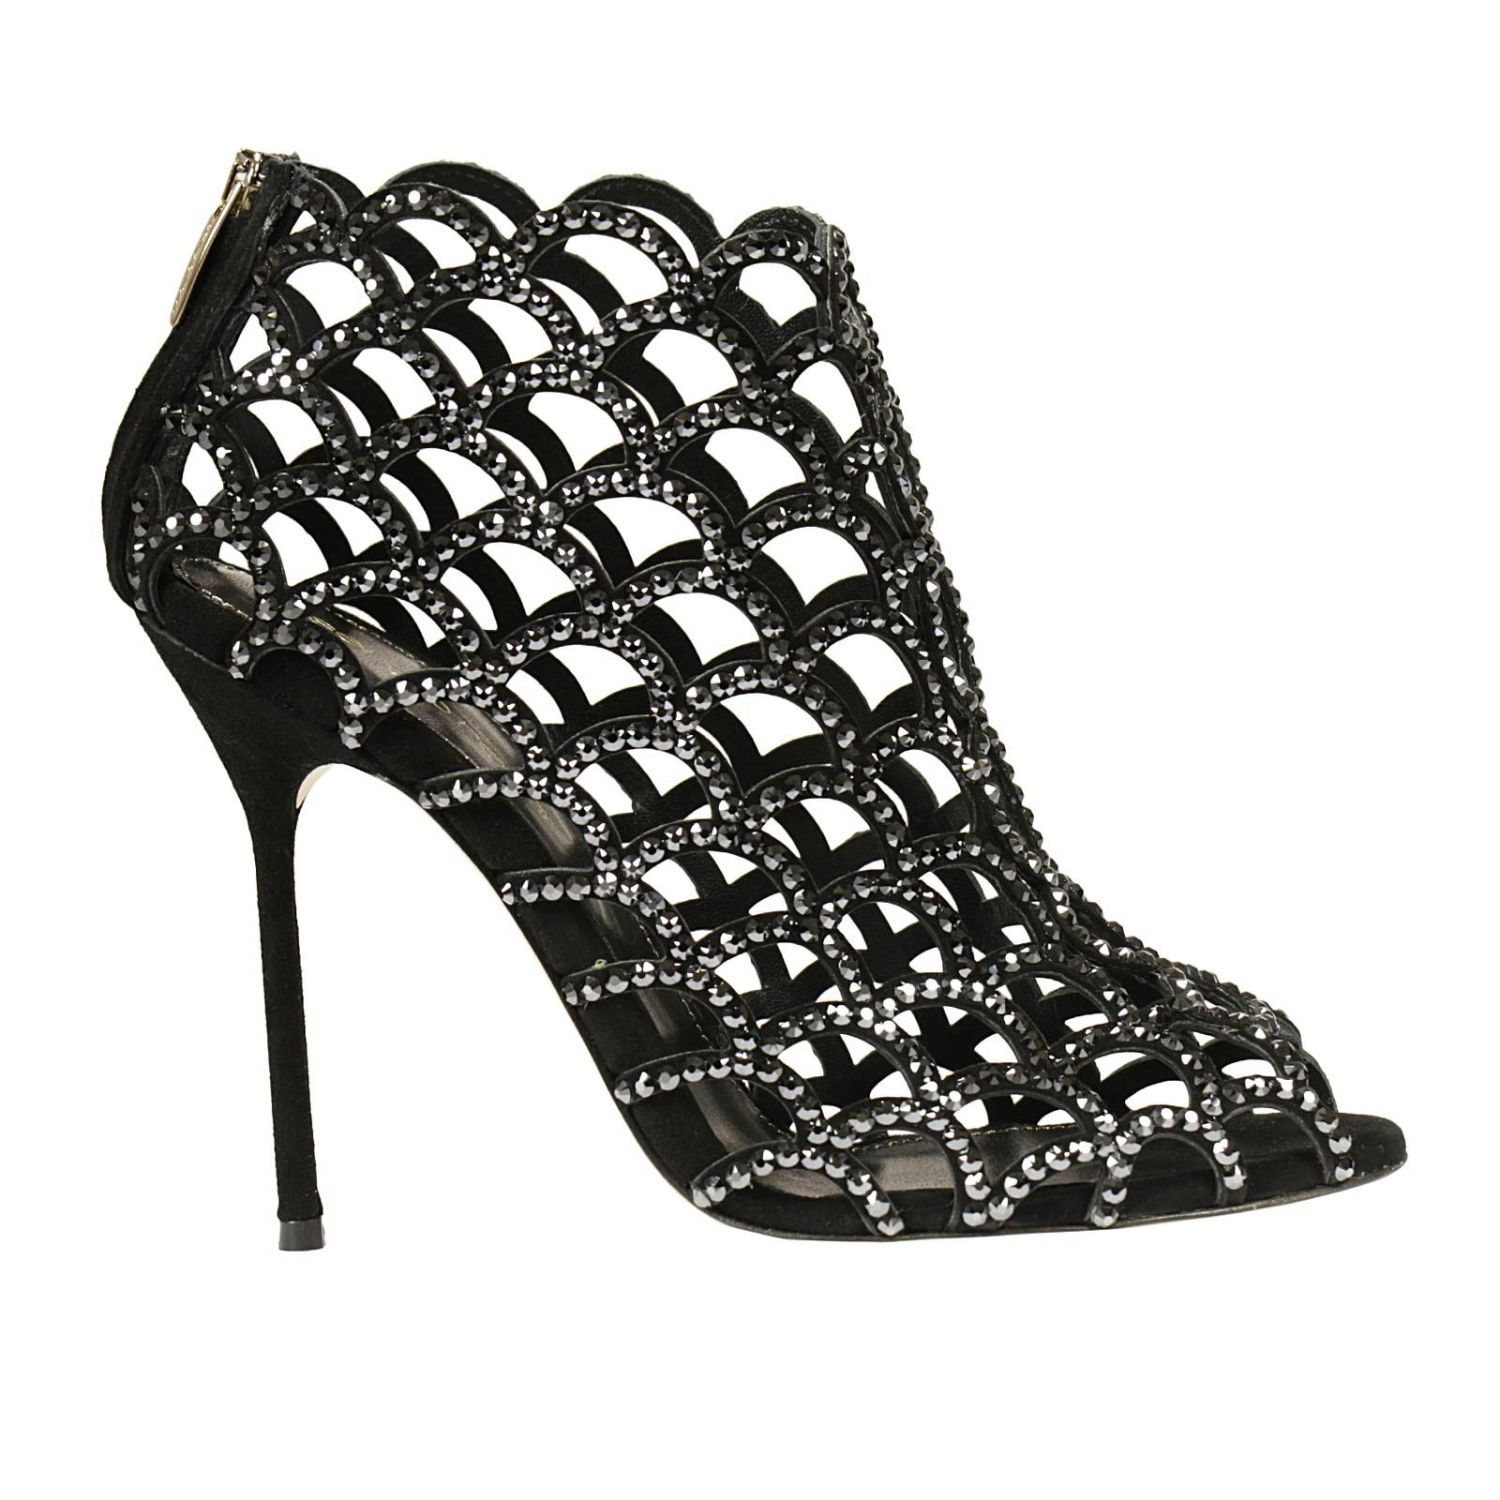 Sergio Rossi Outlet: | High Heel Shoes Sergio Rossi Women Black | High ...